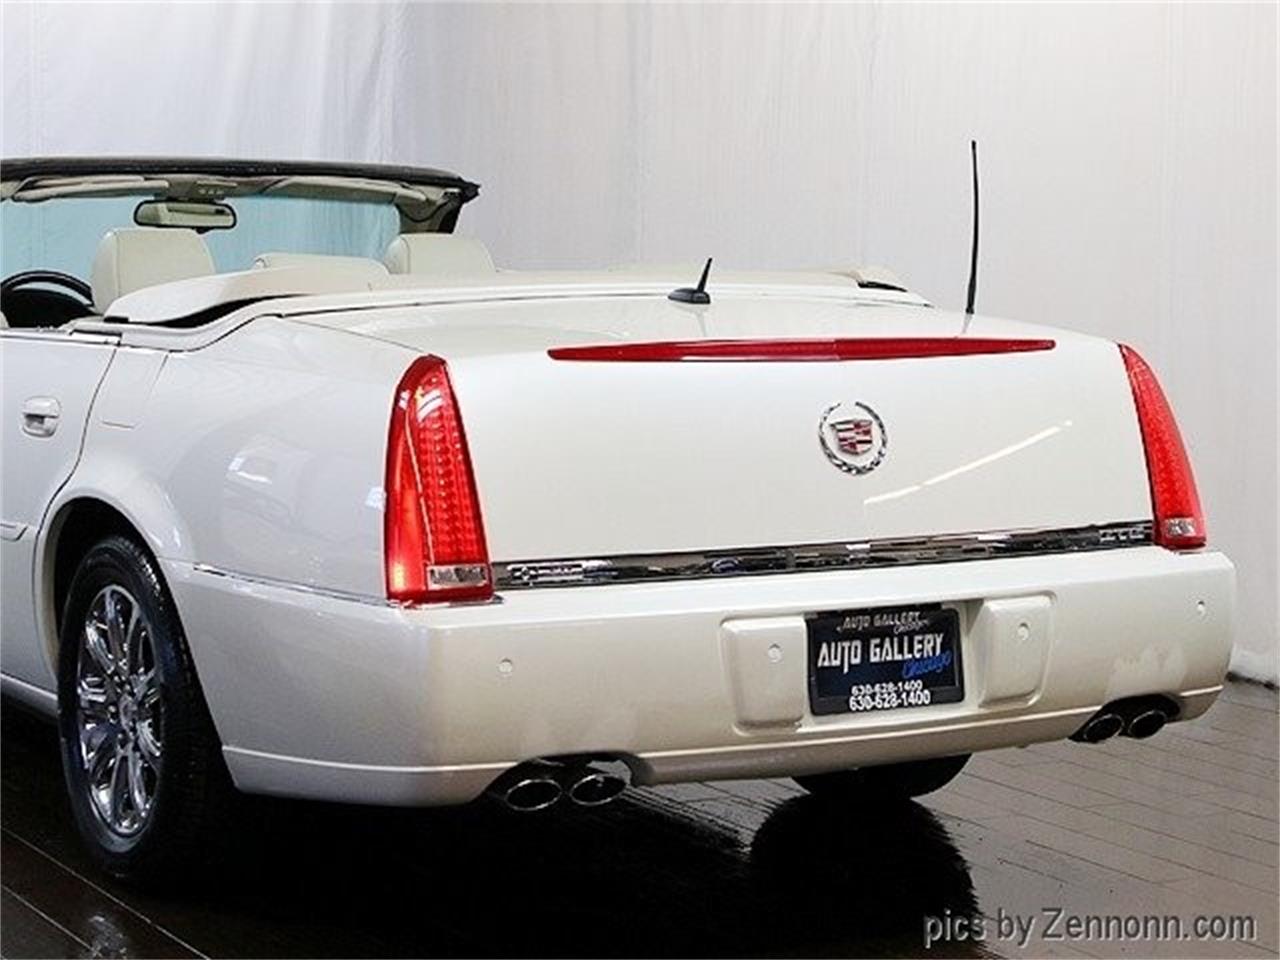 Cadillac Dts Convertible For Sale Craigslist Image ...